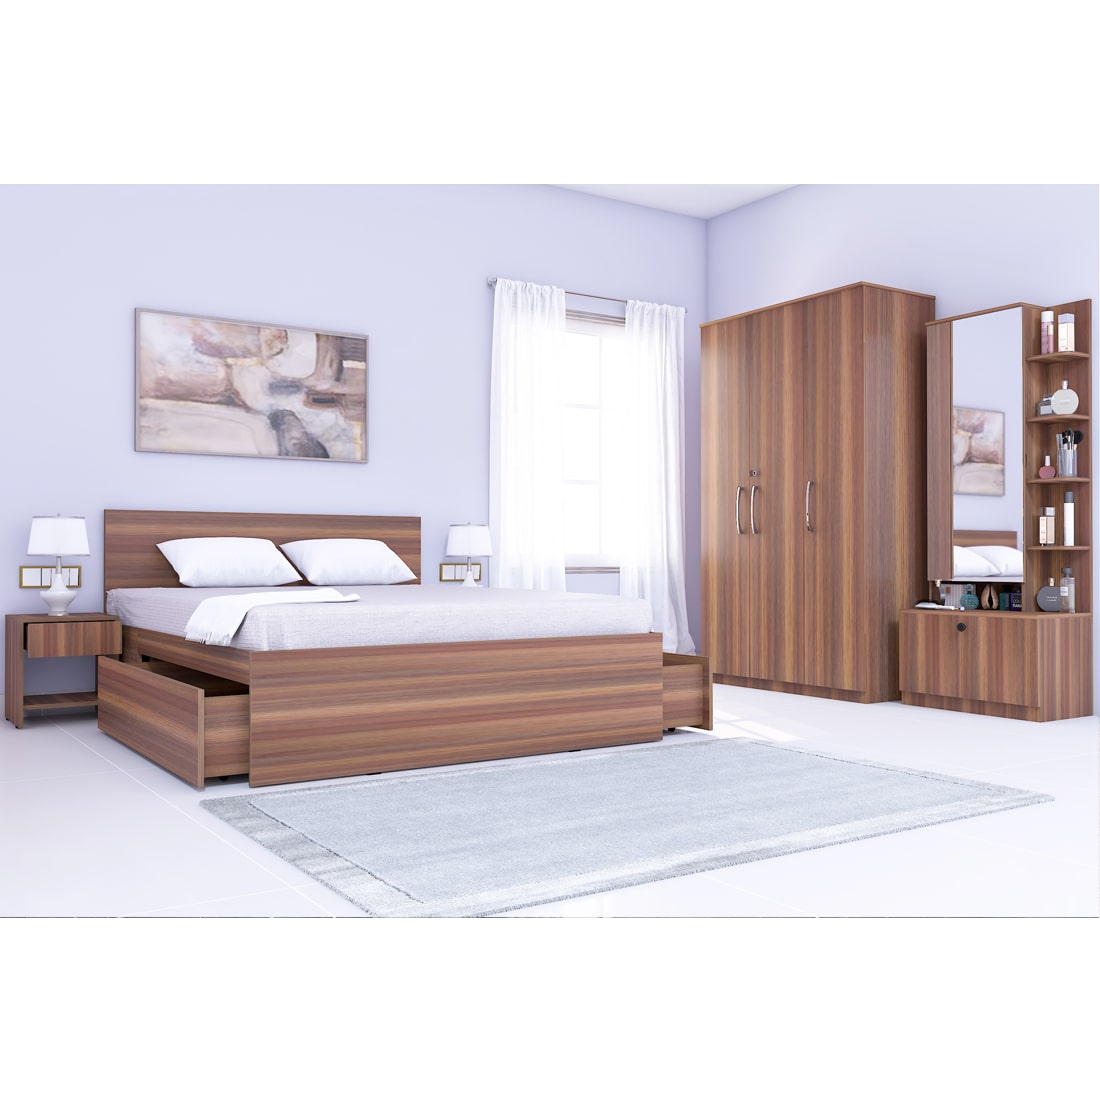 Almirah With Dressing Table King Size Bed With Mattress Bedhead Design,  Inspiration & Images | Bedroom furniture, Buy bedroom furniture, Bedroom  furniture sets